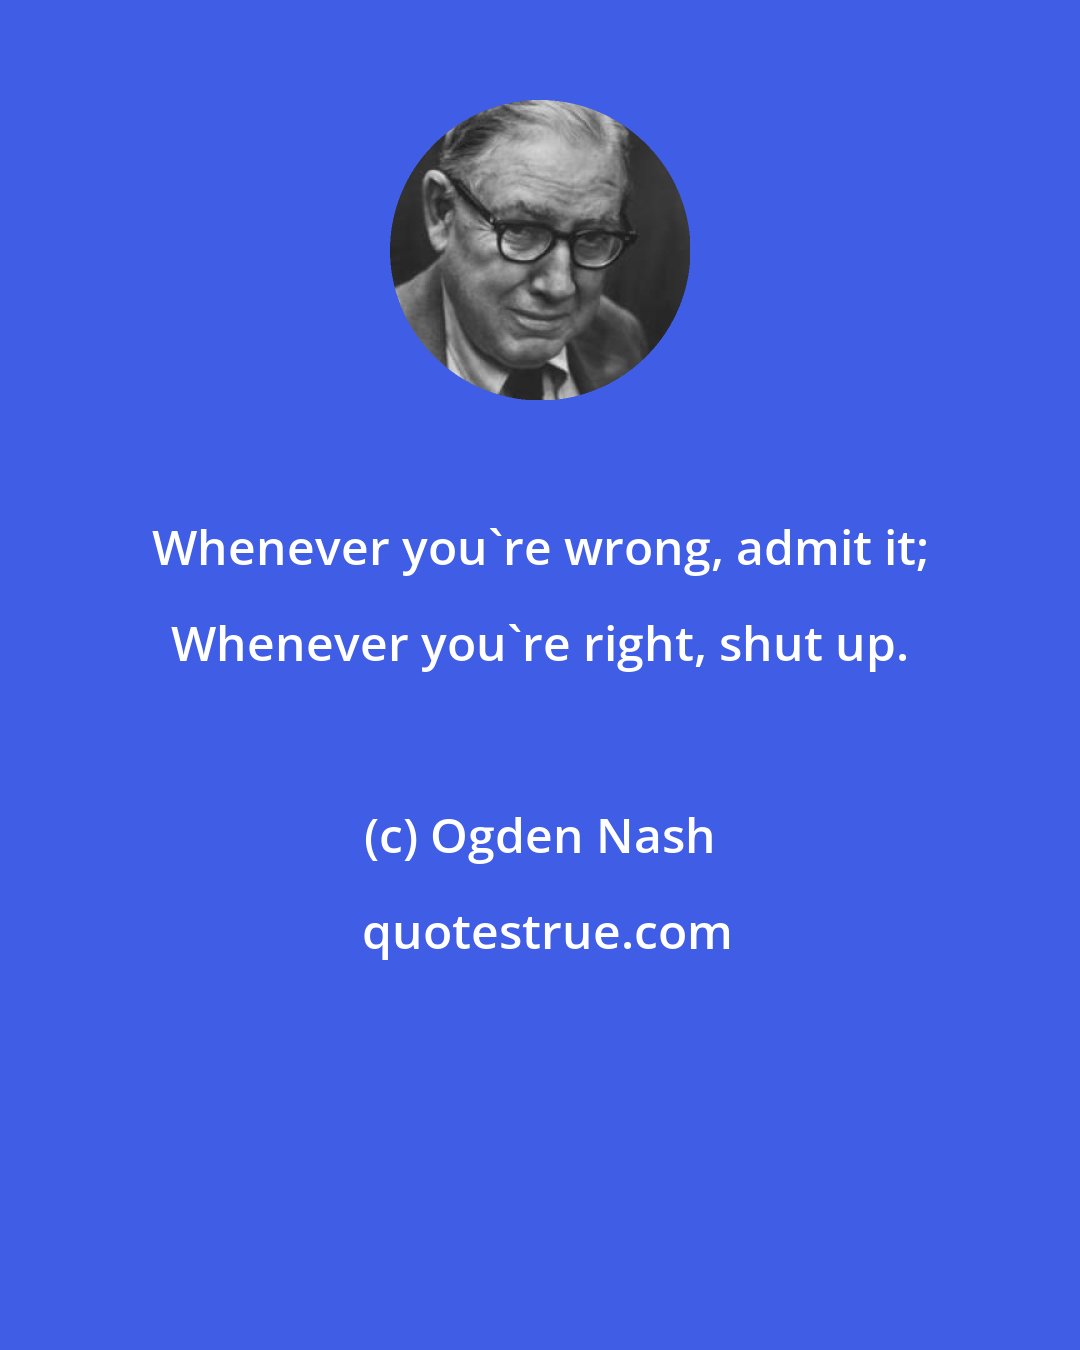 Ogden Nash: Whenever you're wrong, admit it; Whenever you're right, shut up.